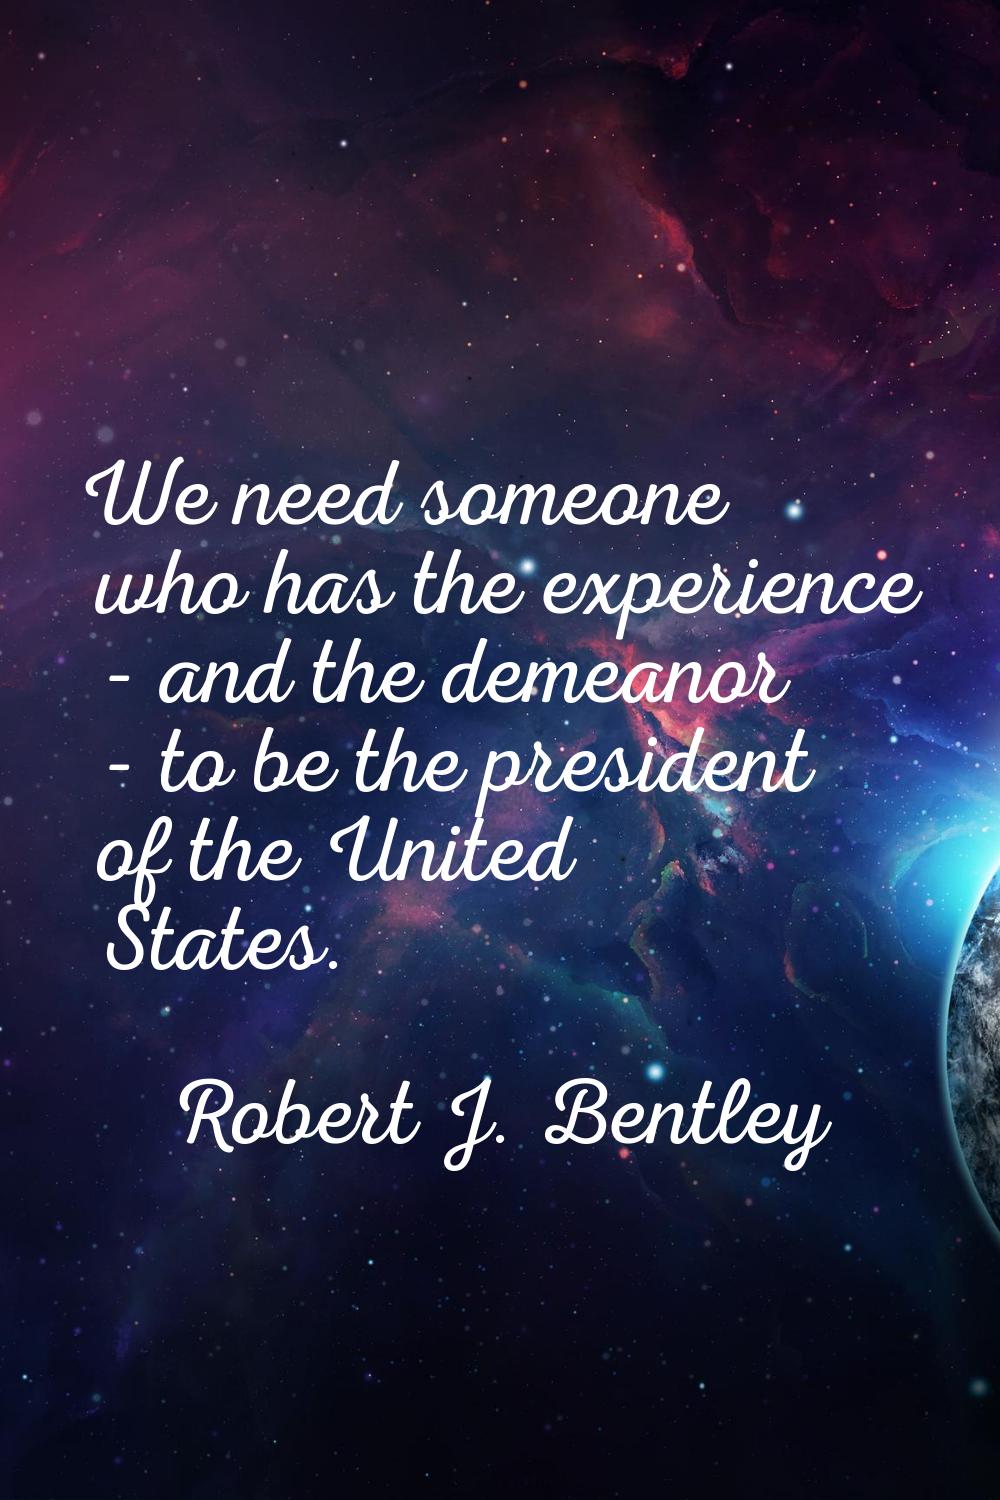 We need someone who has the experience - and the demeanor - to be the president of the United State